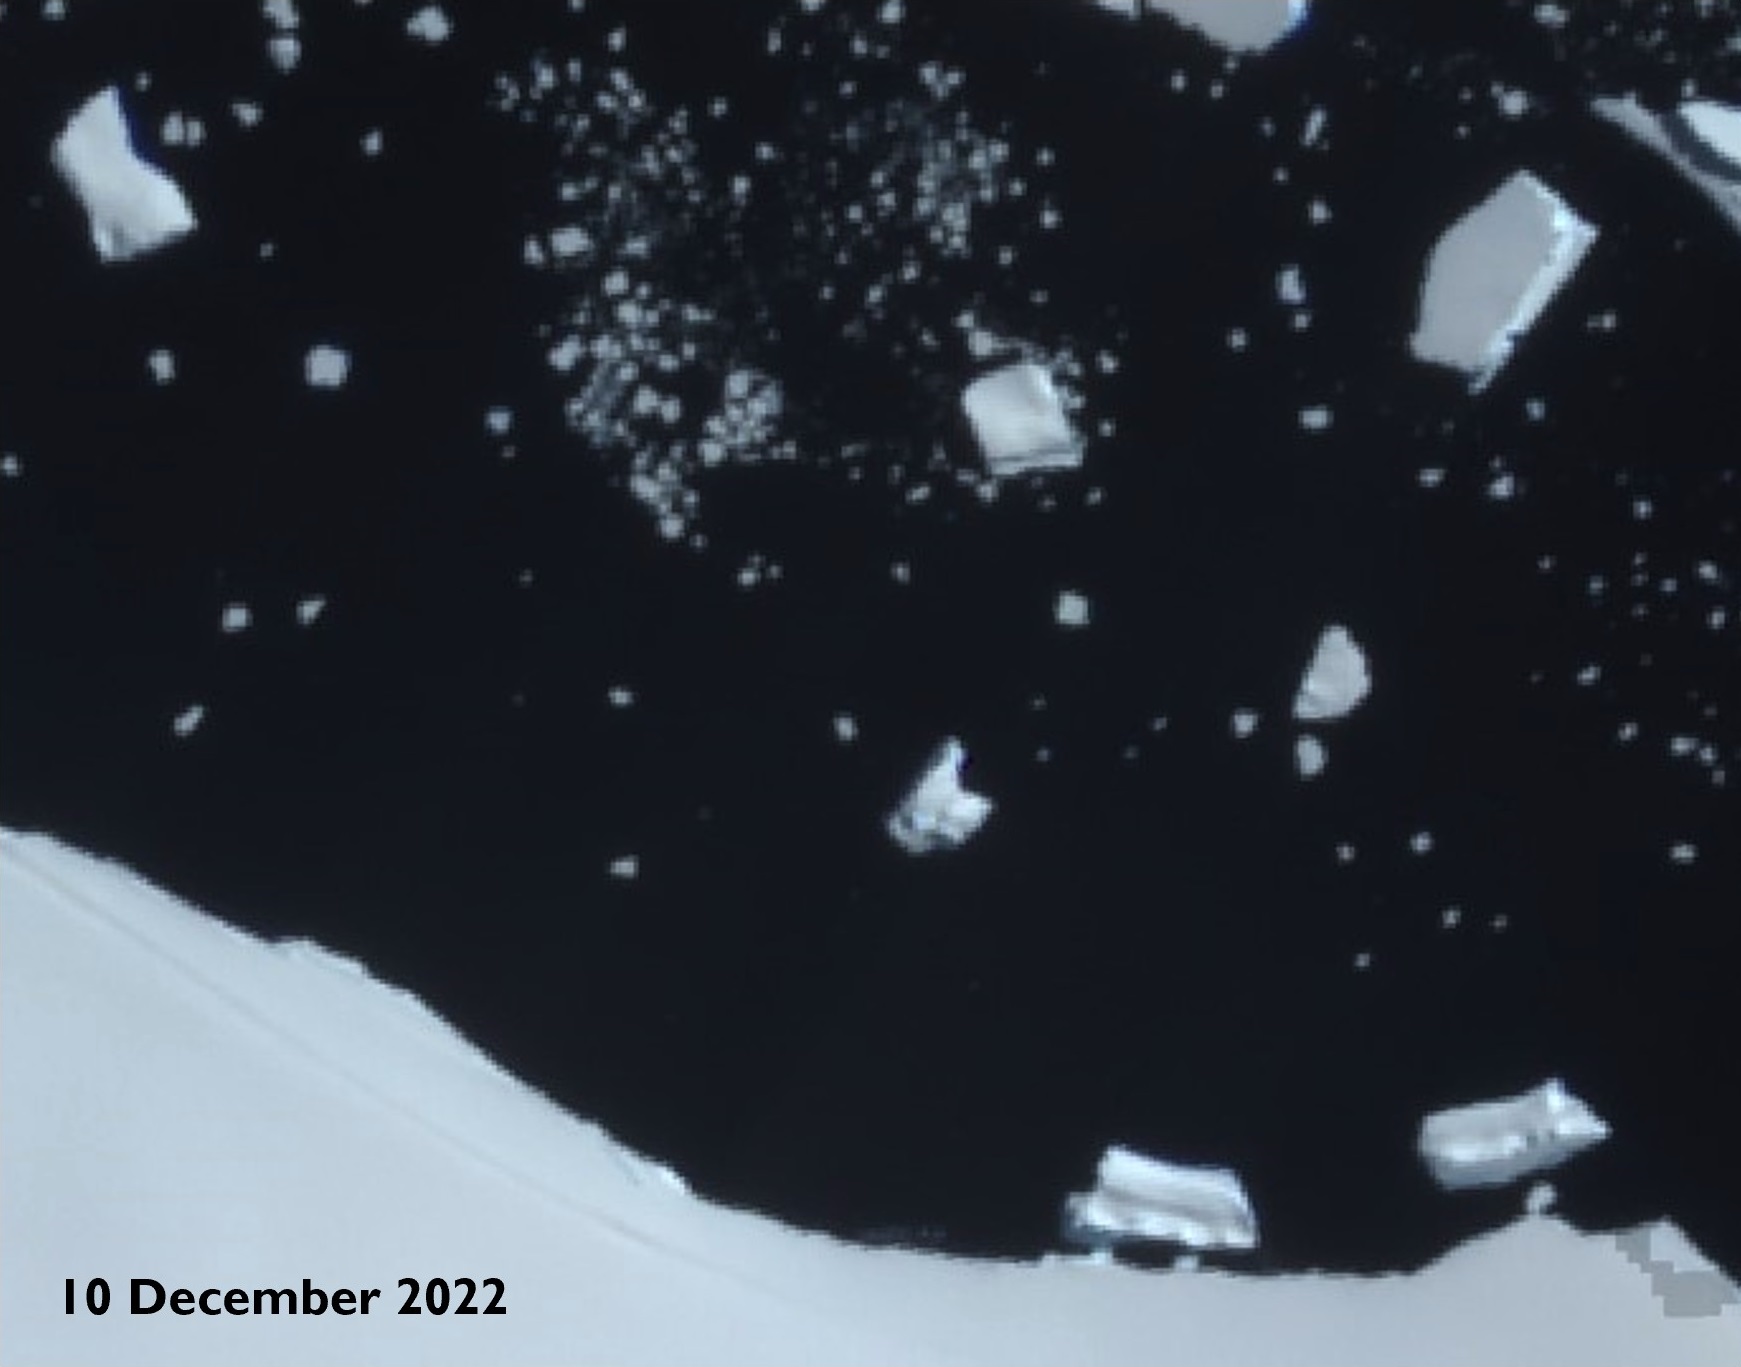 Satellite imagery shows it had almost totally disappeared by December 2022.